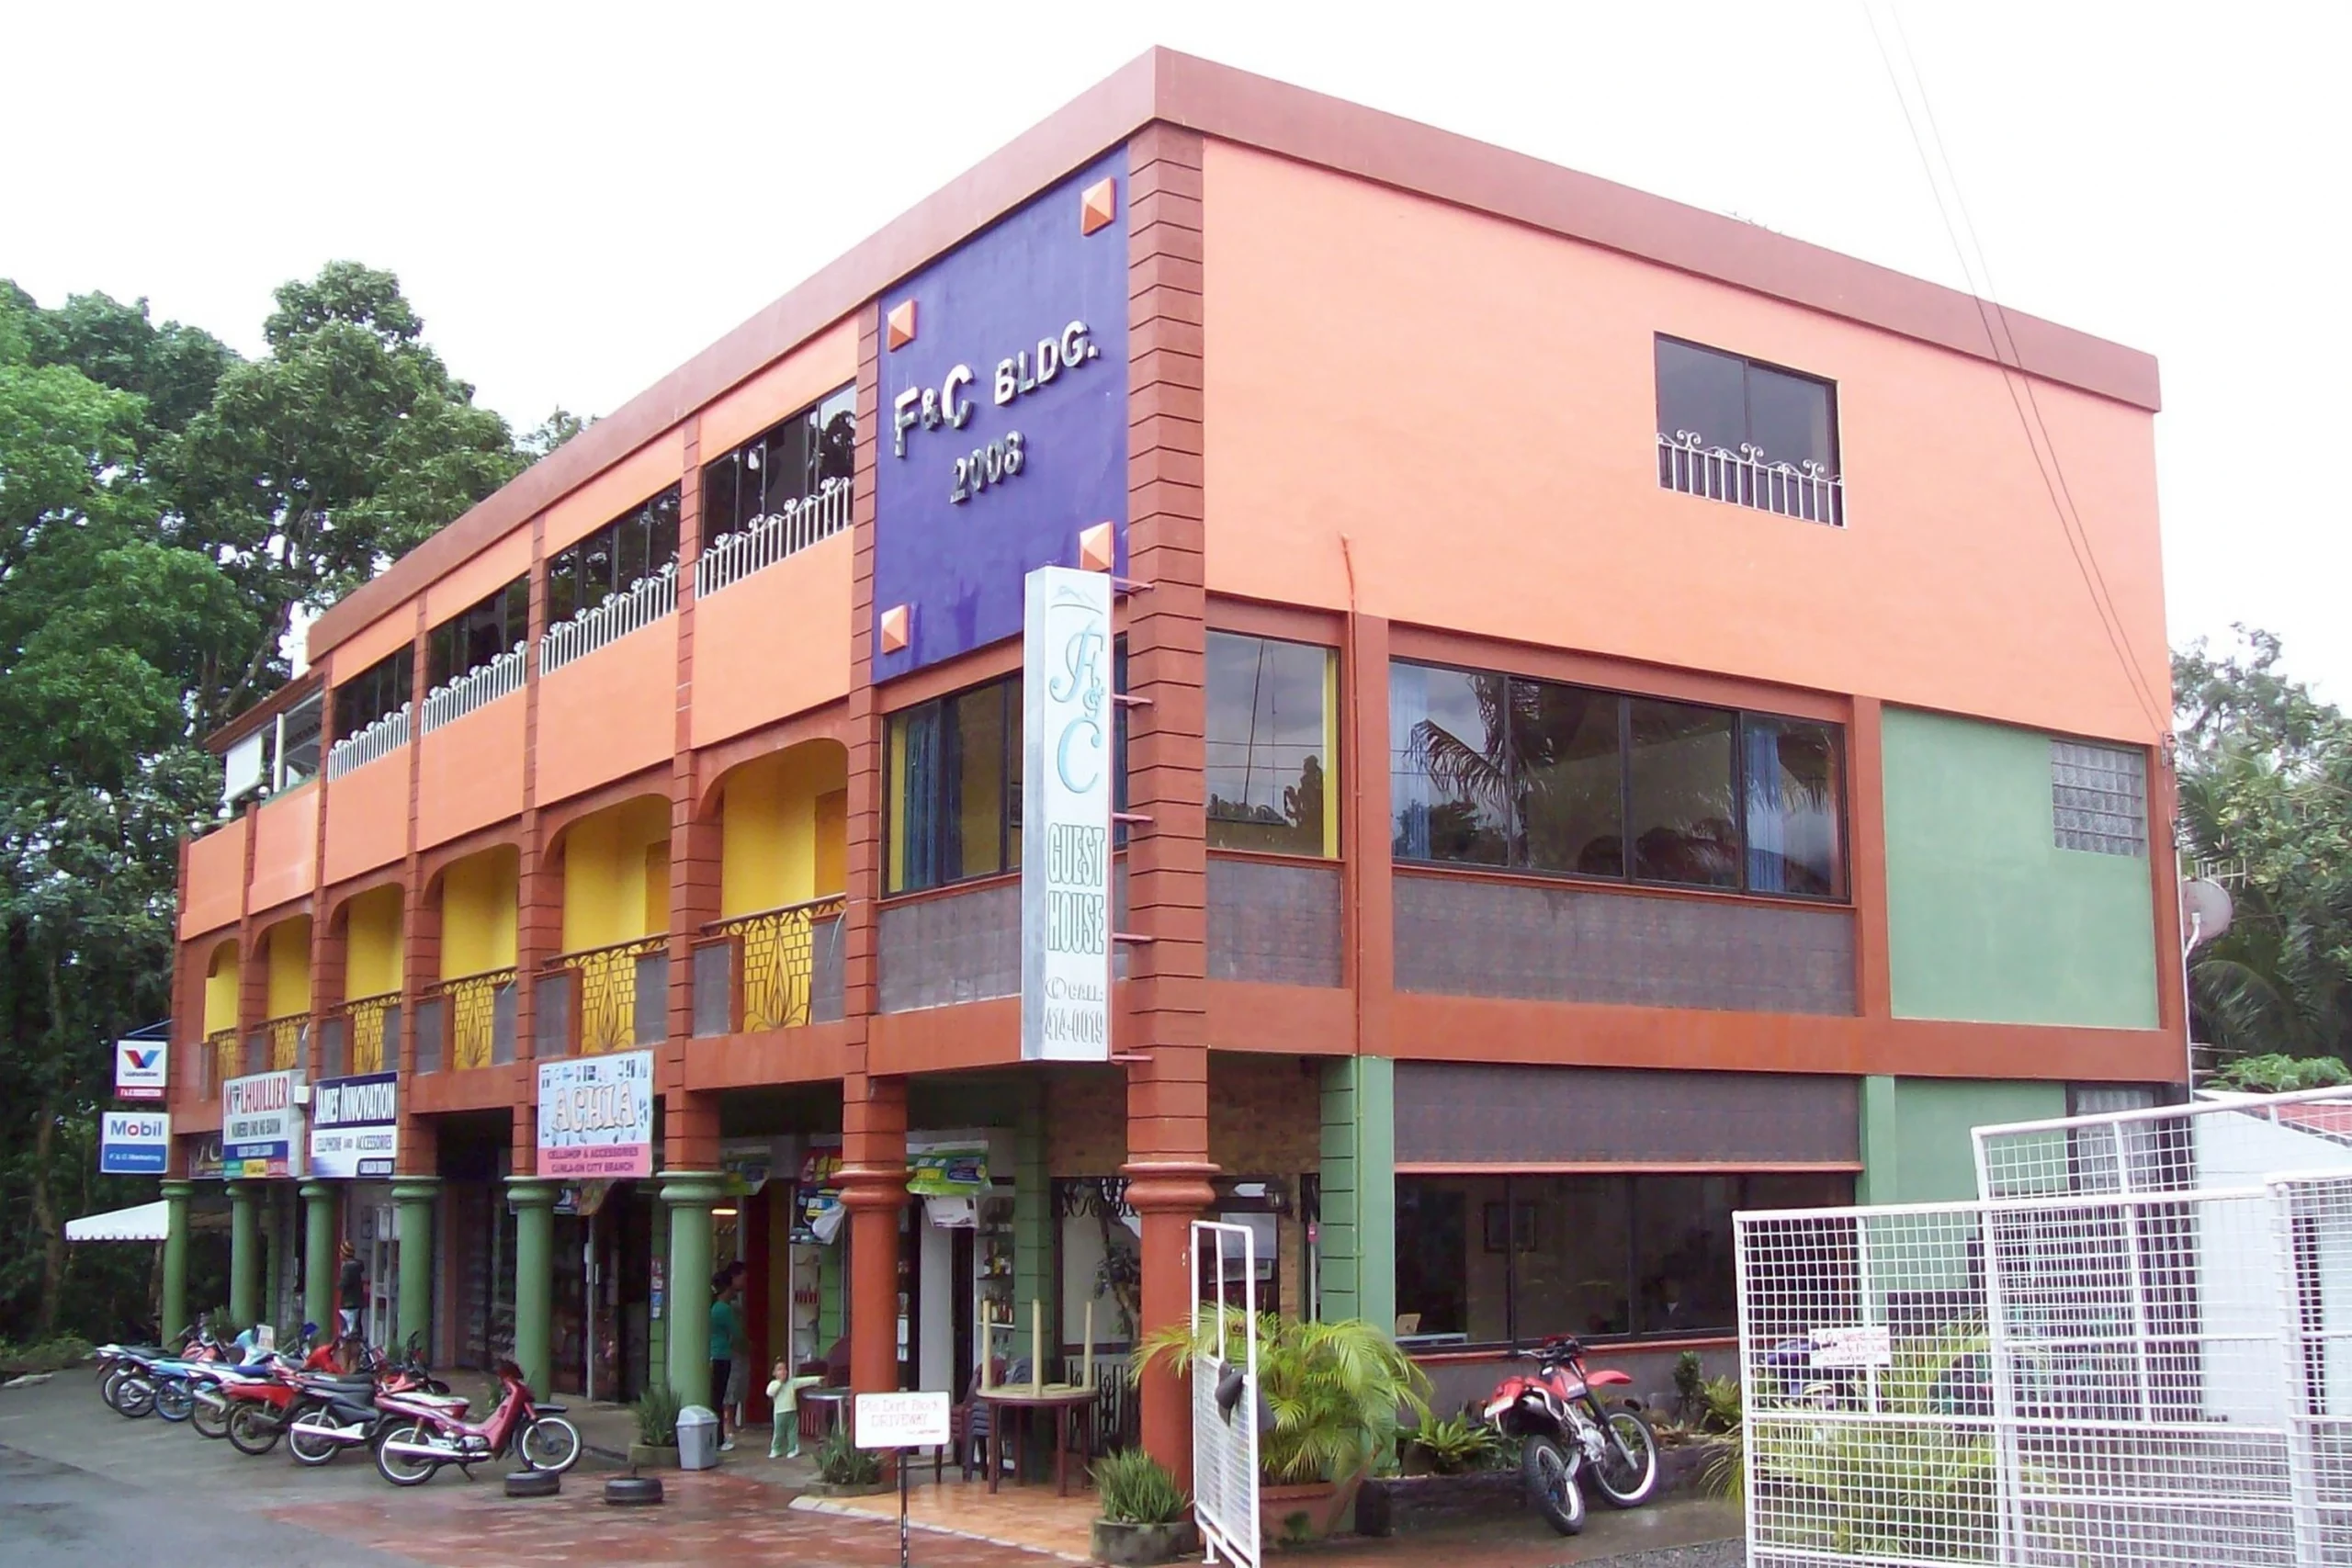 F&C Guest House